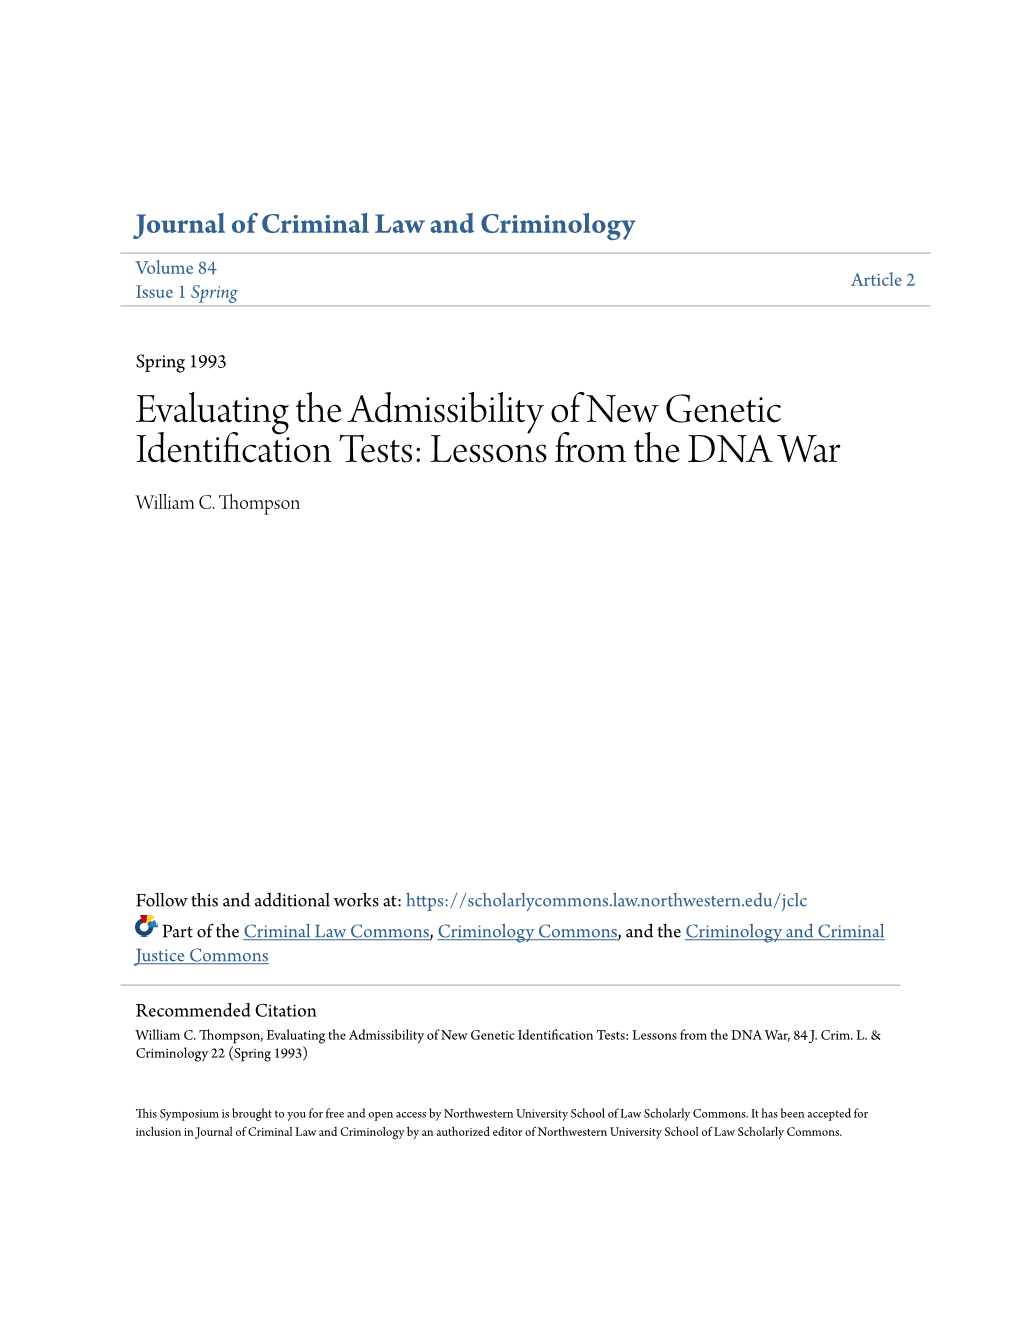 Evaluating the Admissibility of New Genetic Identification Tests: Lessons from the DNA War William C